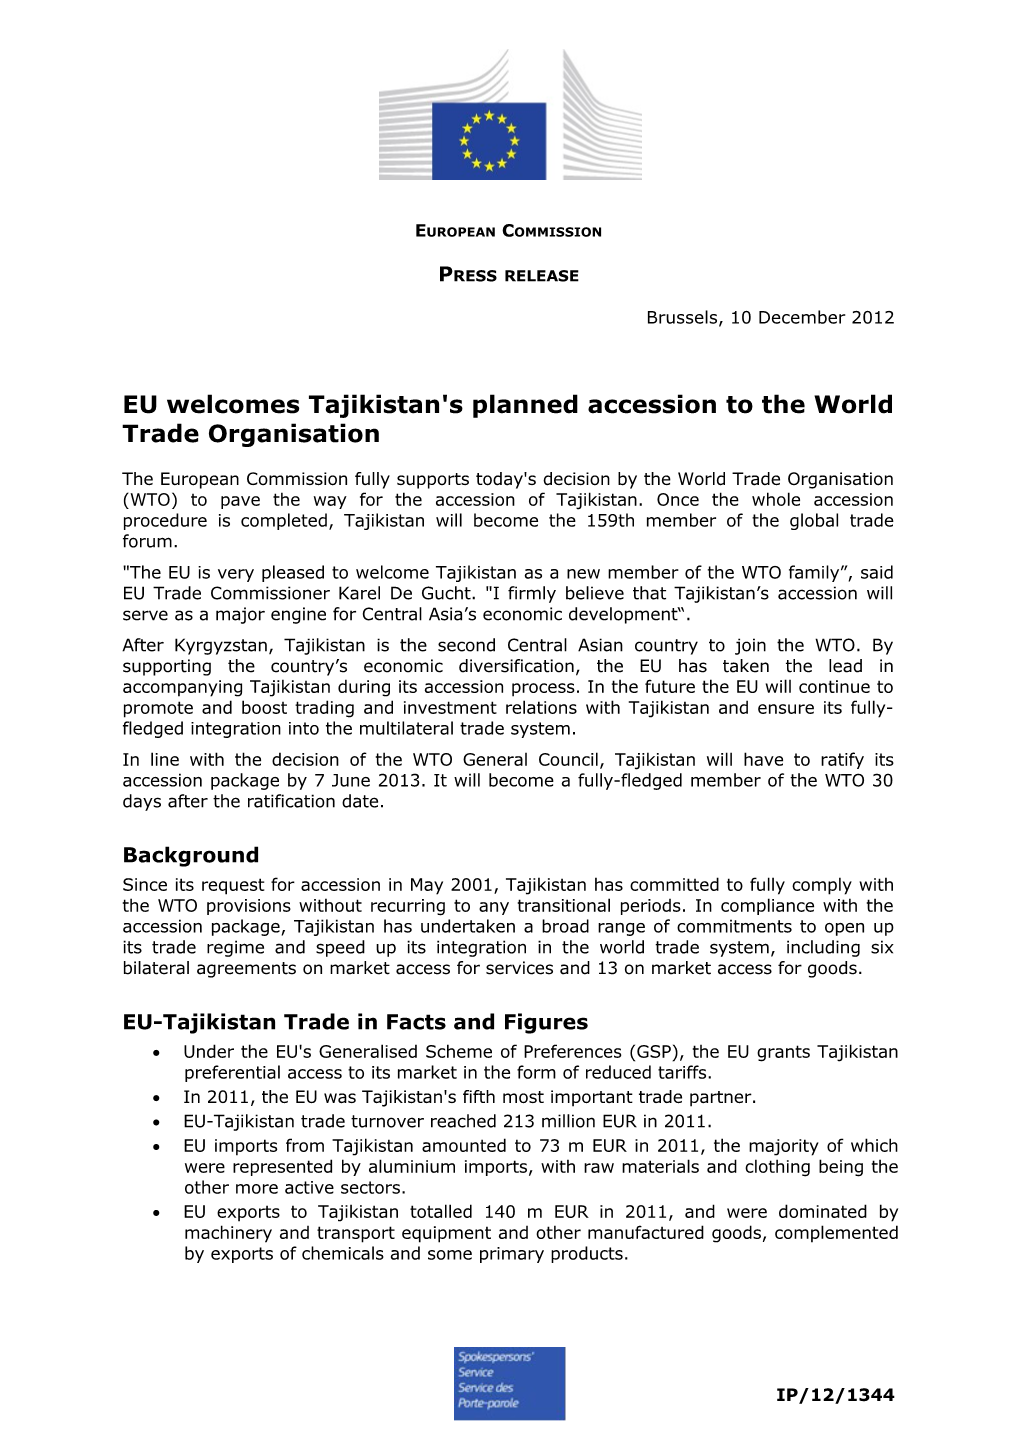 EU Welcomes Tajikistan's Planned Accession to the World Trade Organisation